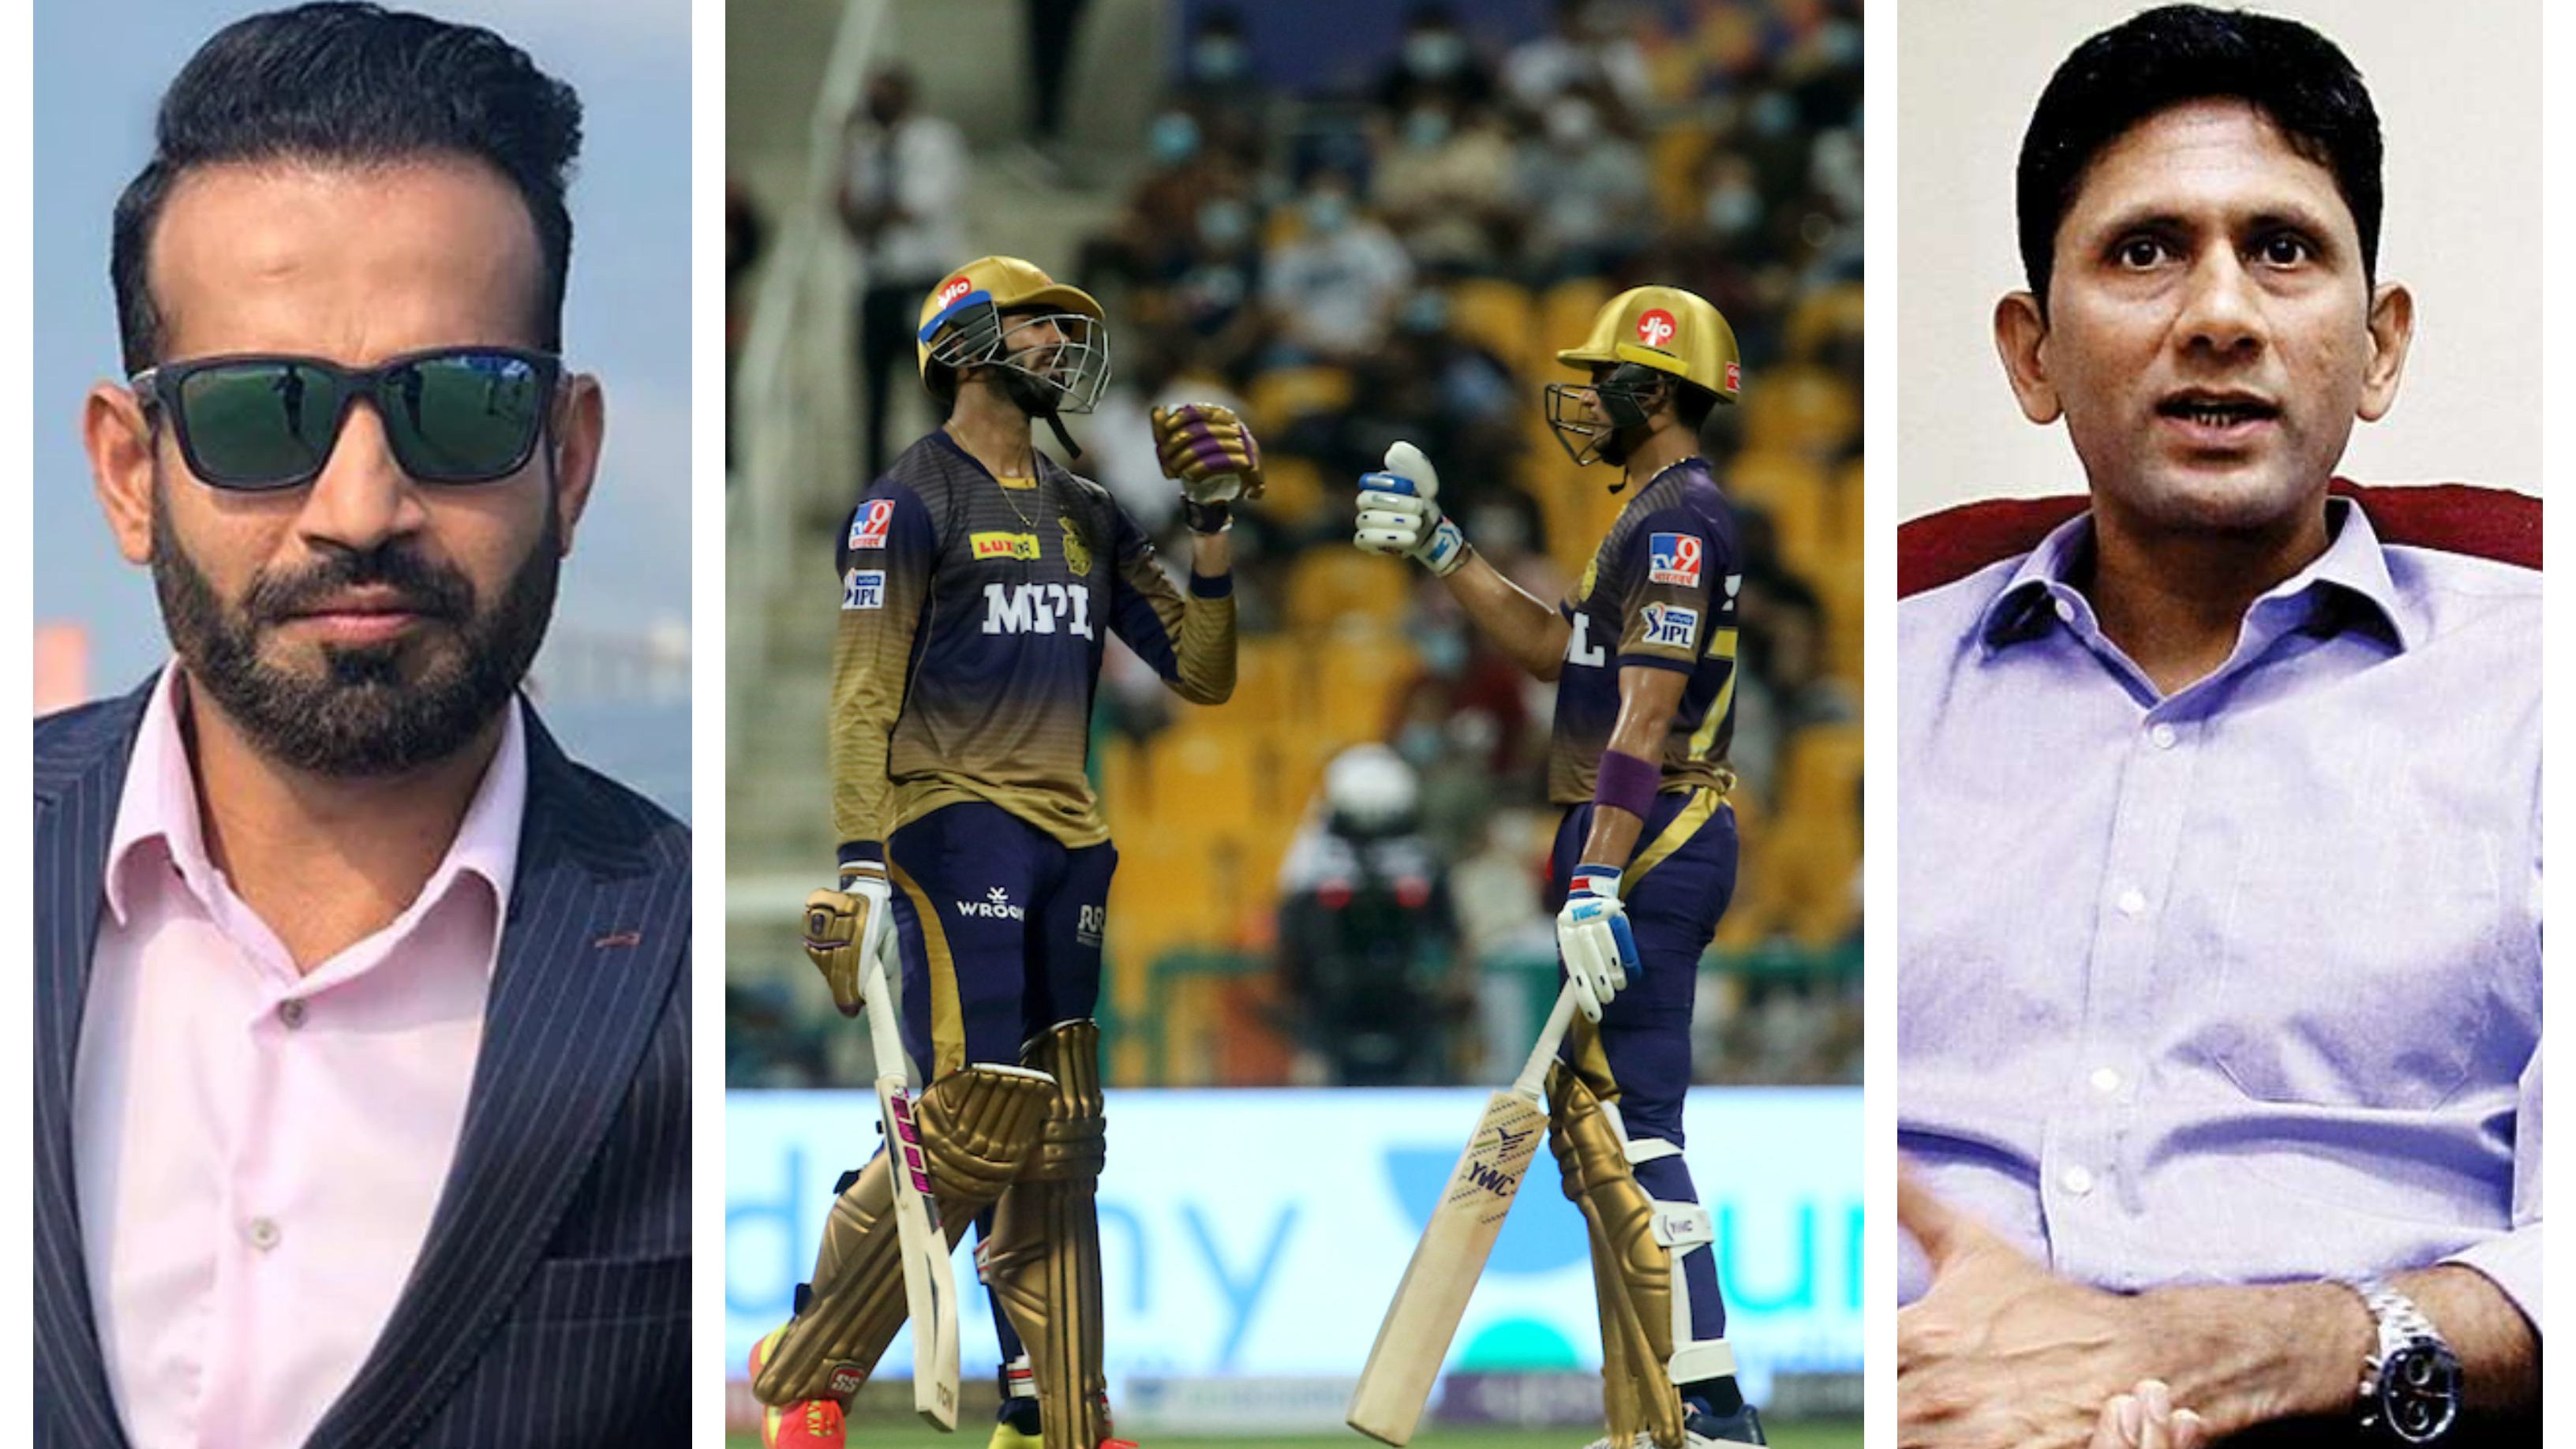 IPL 2021: Cricket fraternity reacts as KKR outplayed RCB in all departments to register a resounding win